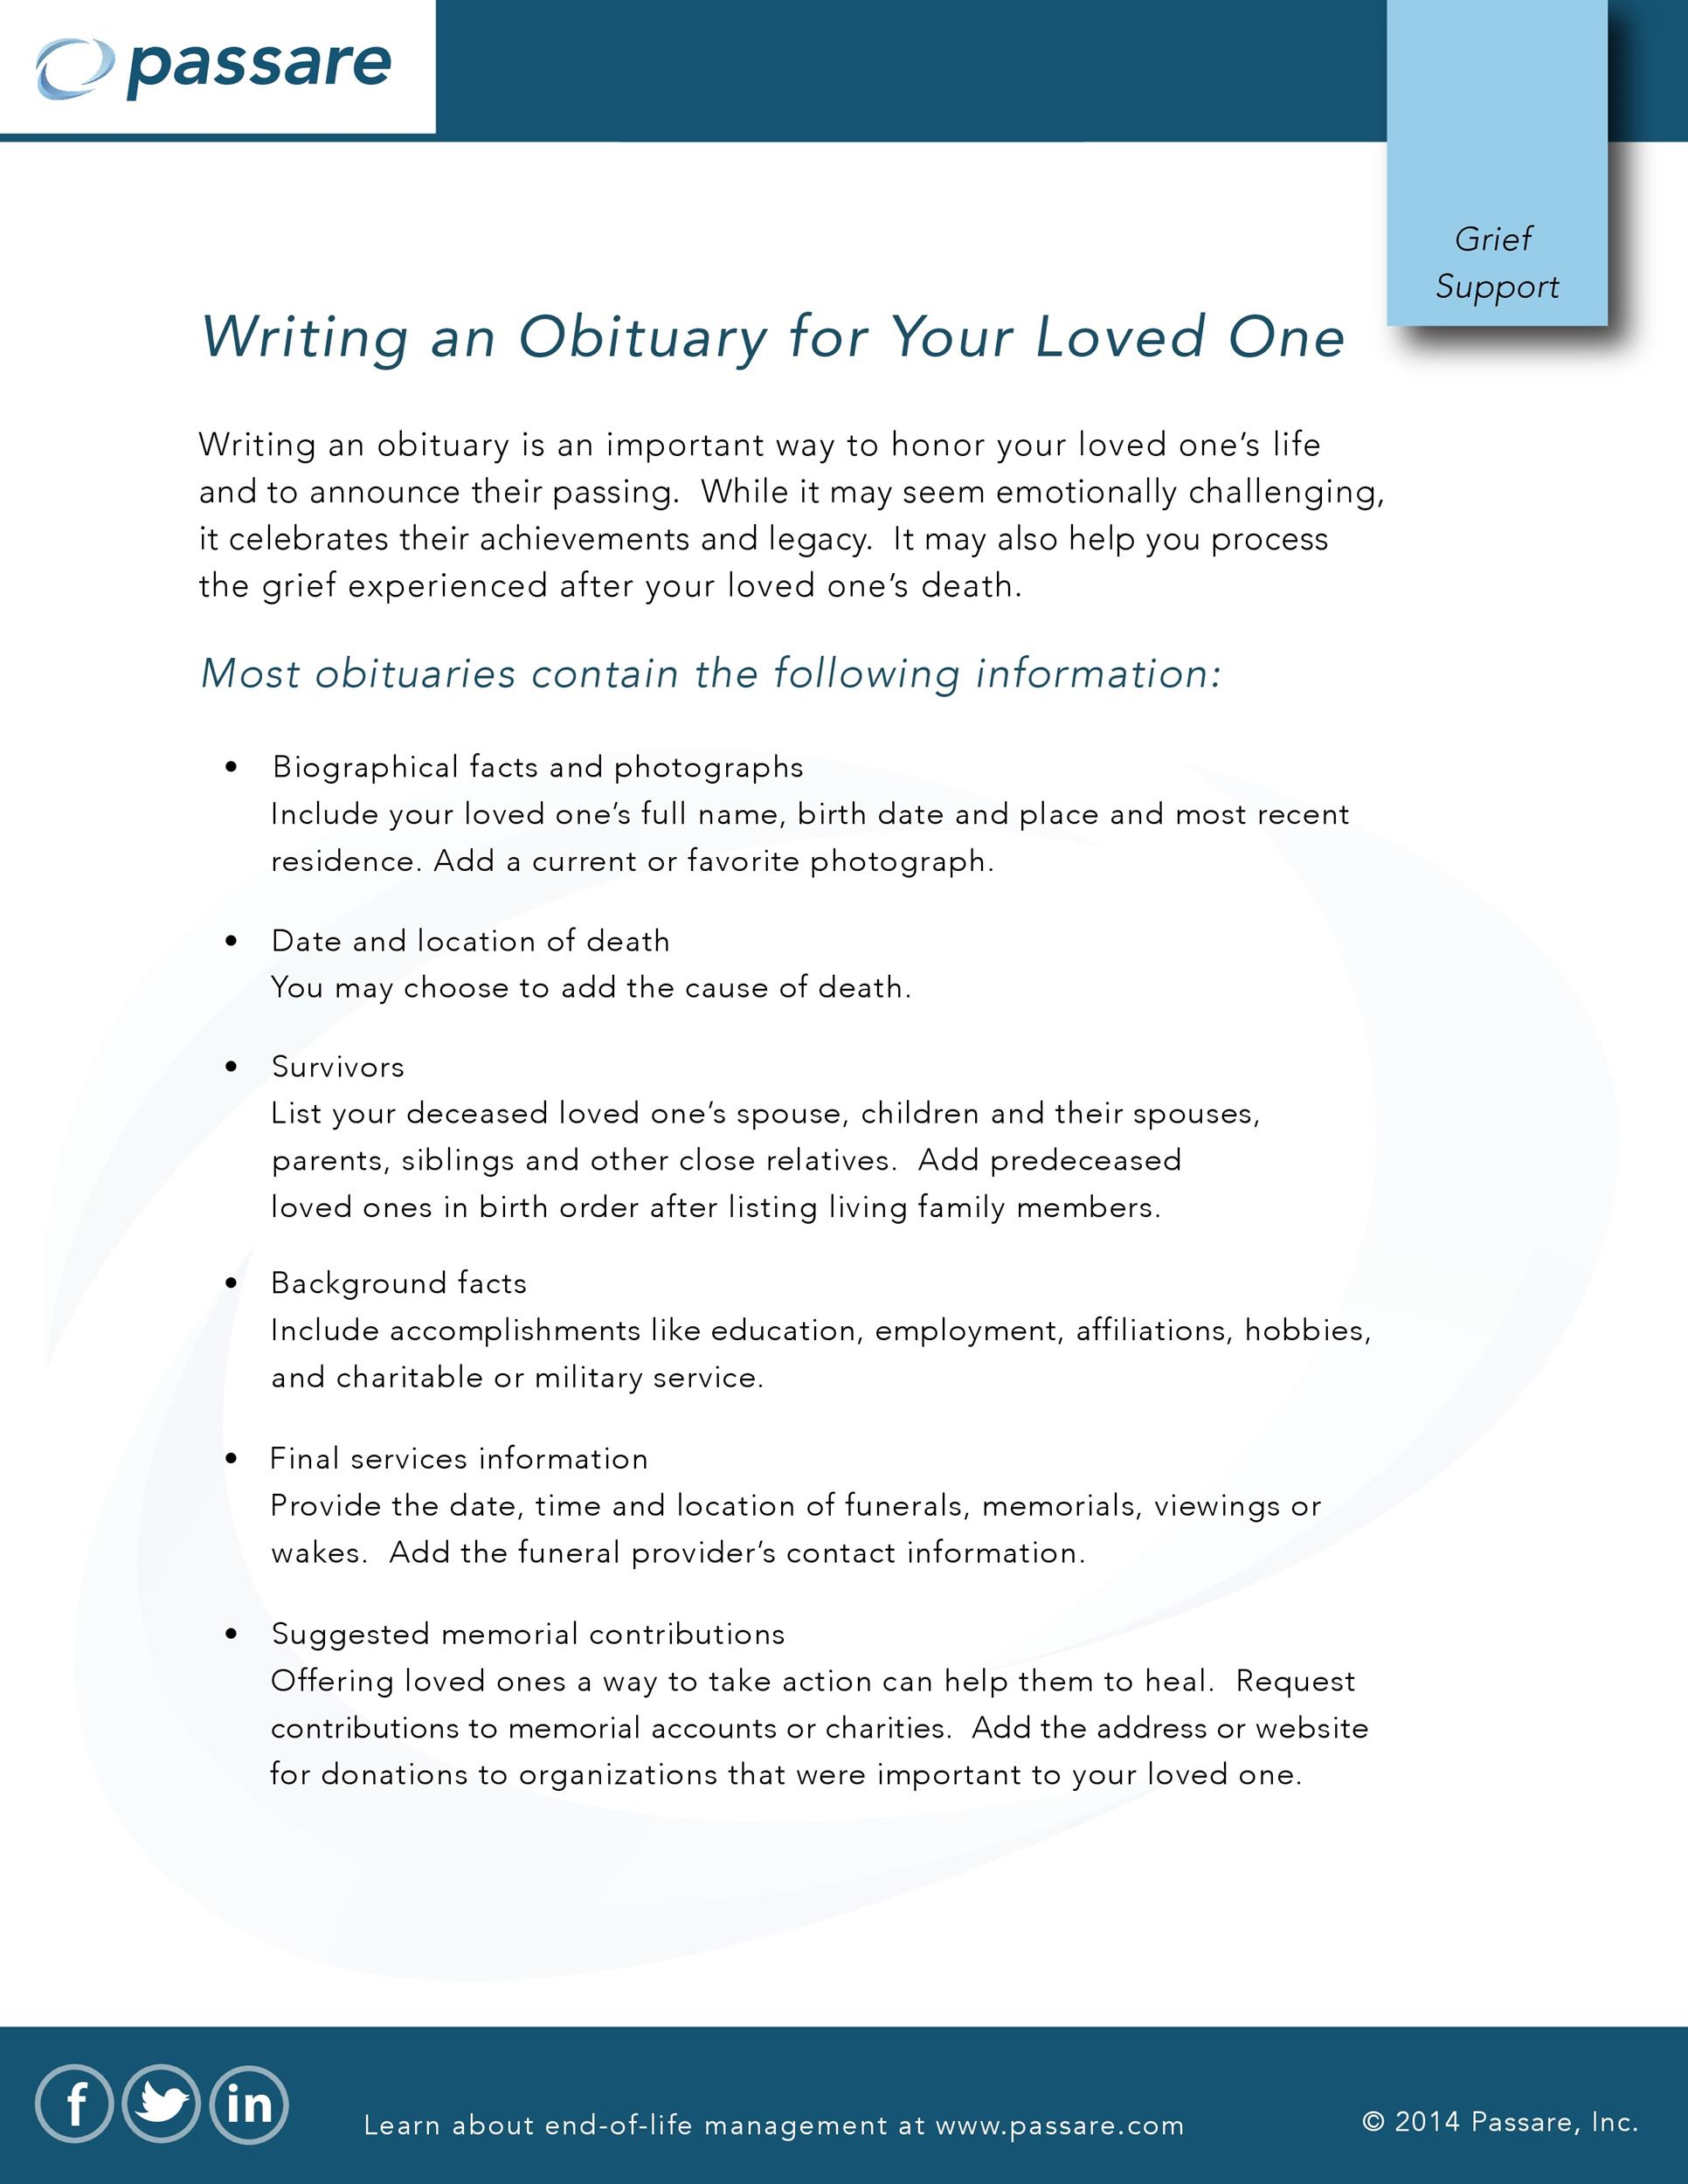 Free Writing an Obituary for Your Loved One